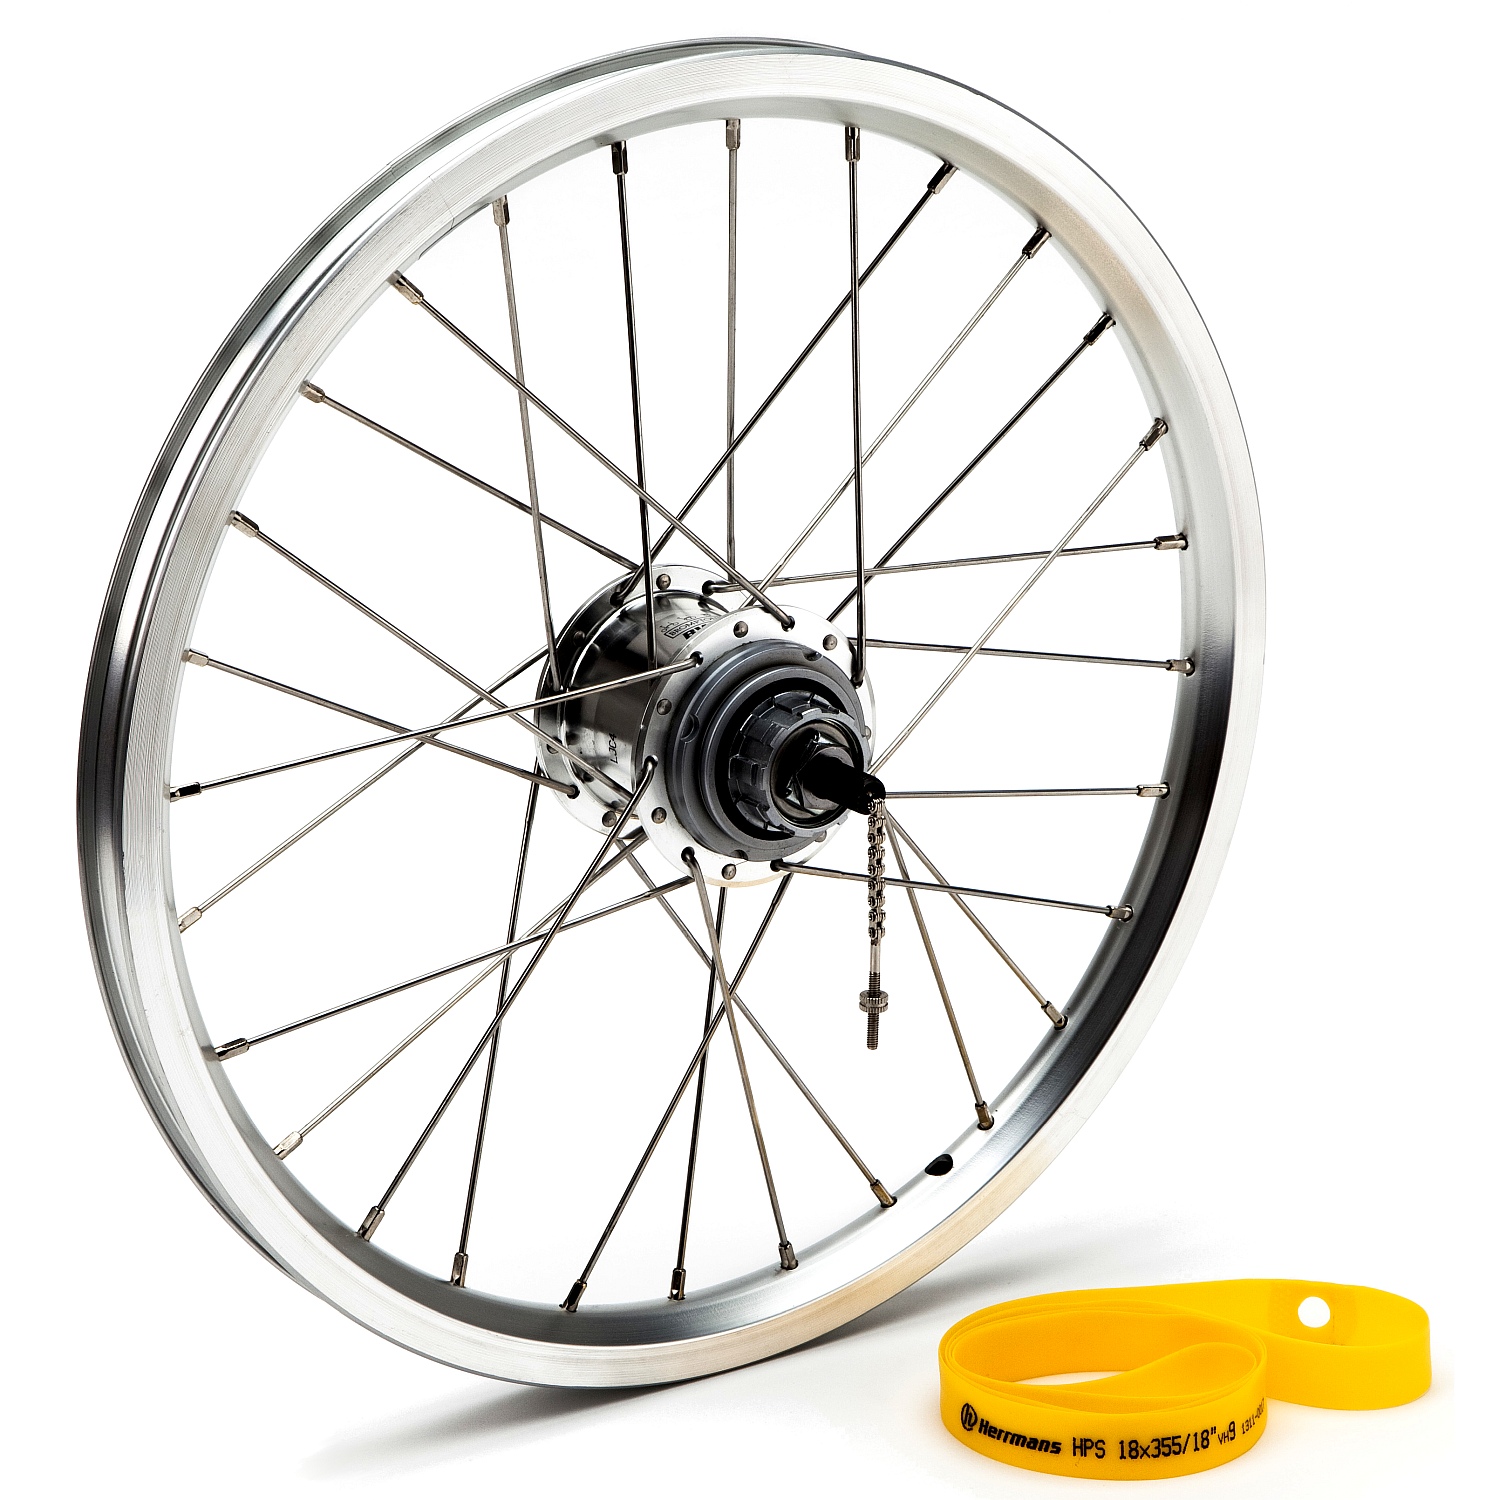 Image of Brompton 16" Rear Wheel with 3-speed Gear Hub - BWR - silver